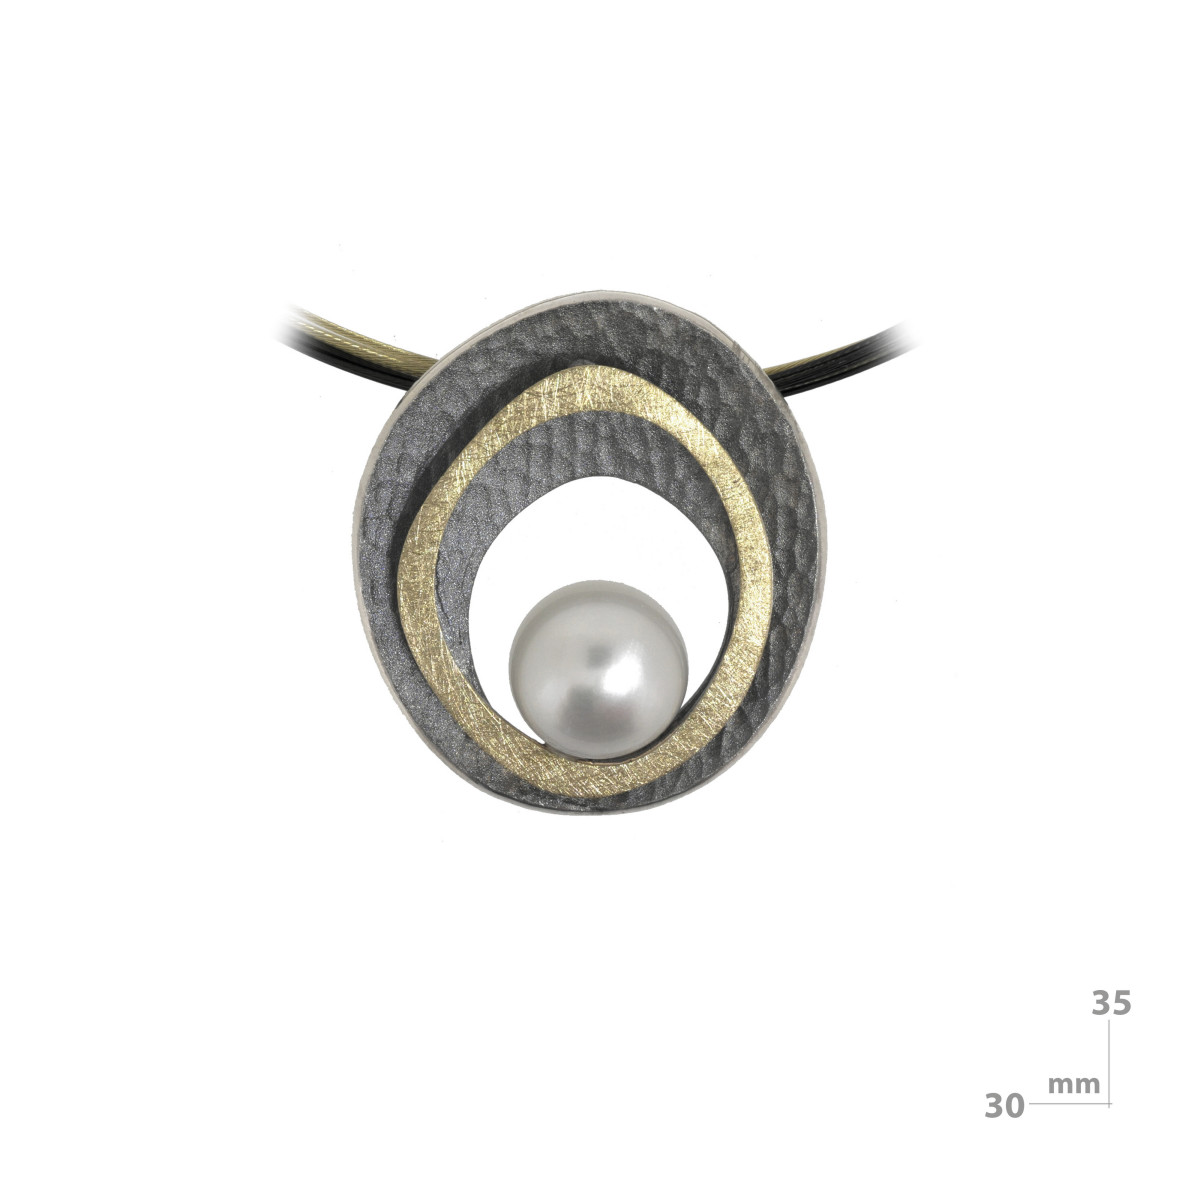 Silver, gold and cultured pearl pendant